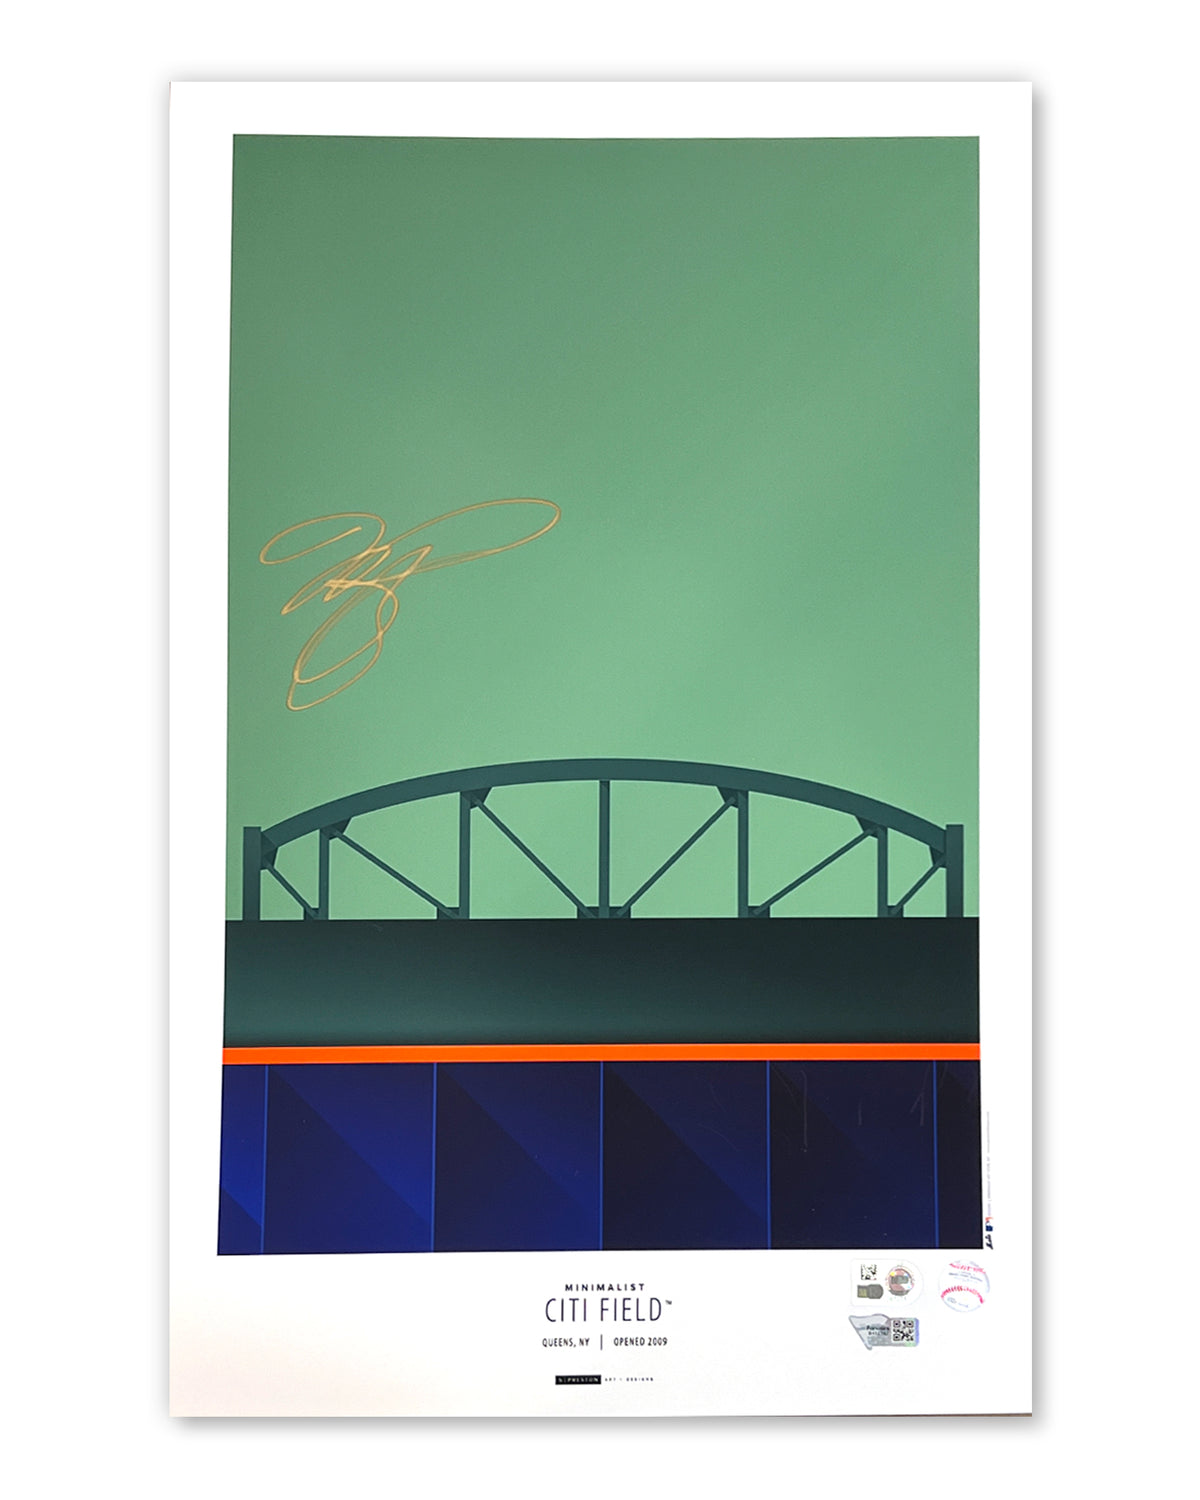 Minimalist Shea Stadium - Mike Piazza Autographed - Poster Print - MLB Authenticated